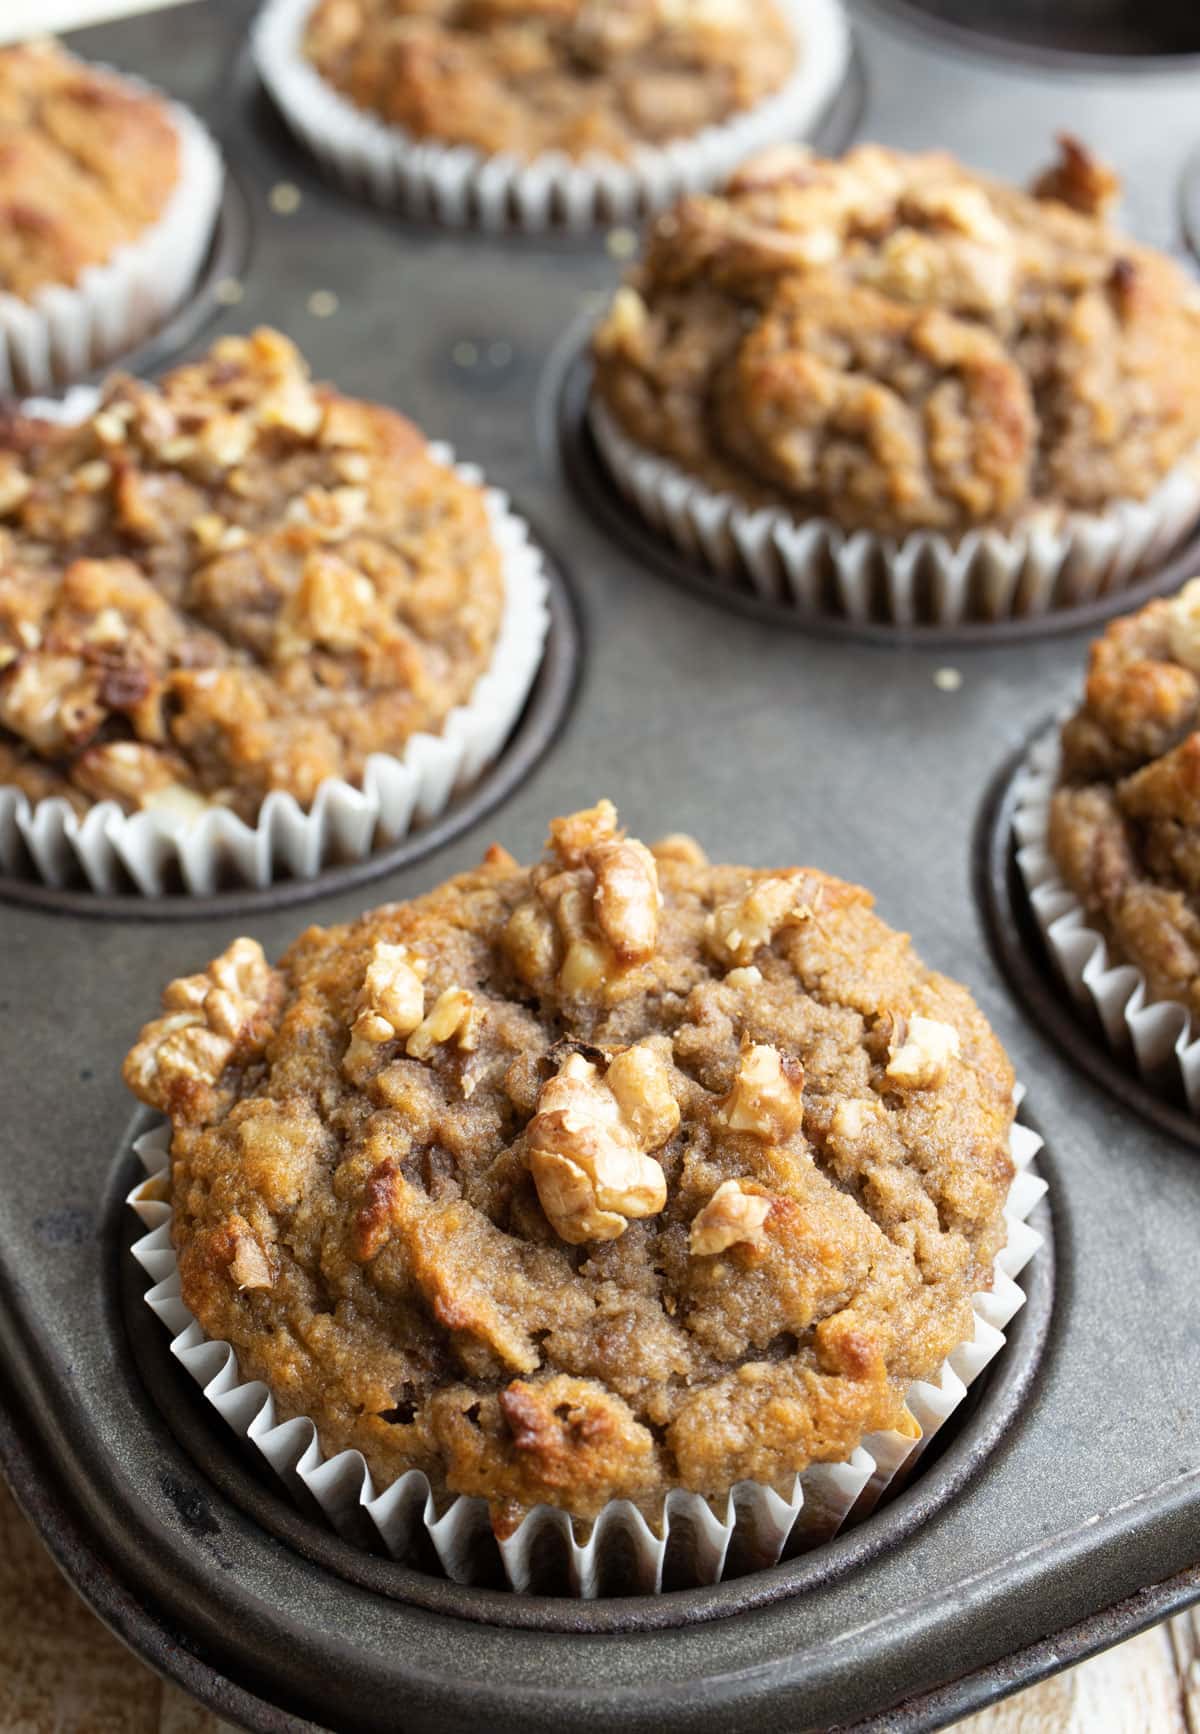 Banana muffins topped with chopped walnuts.